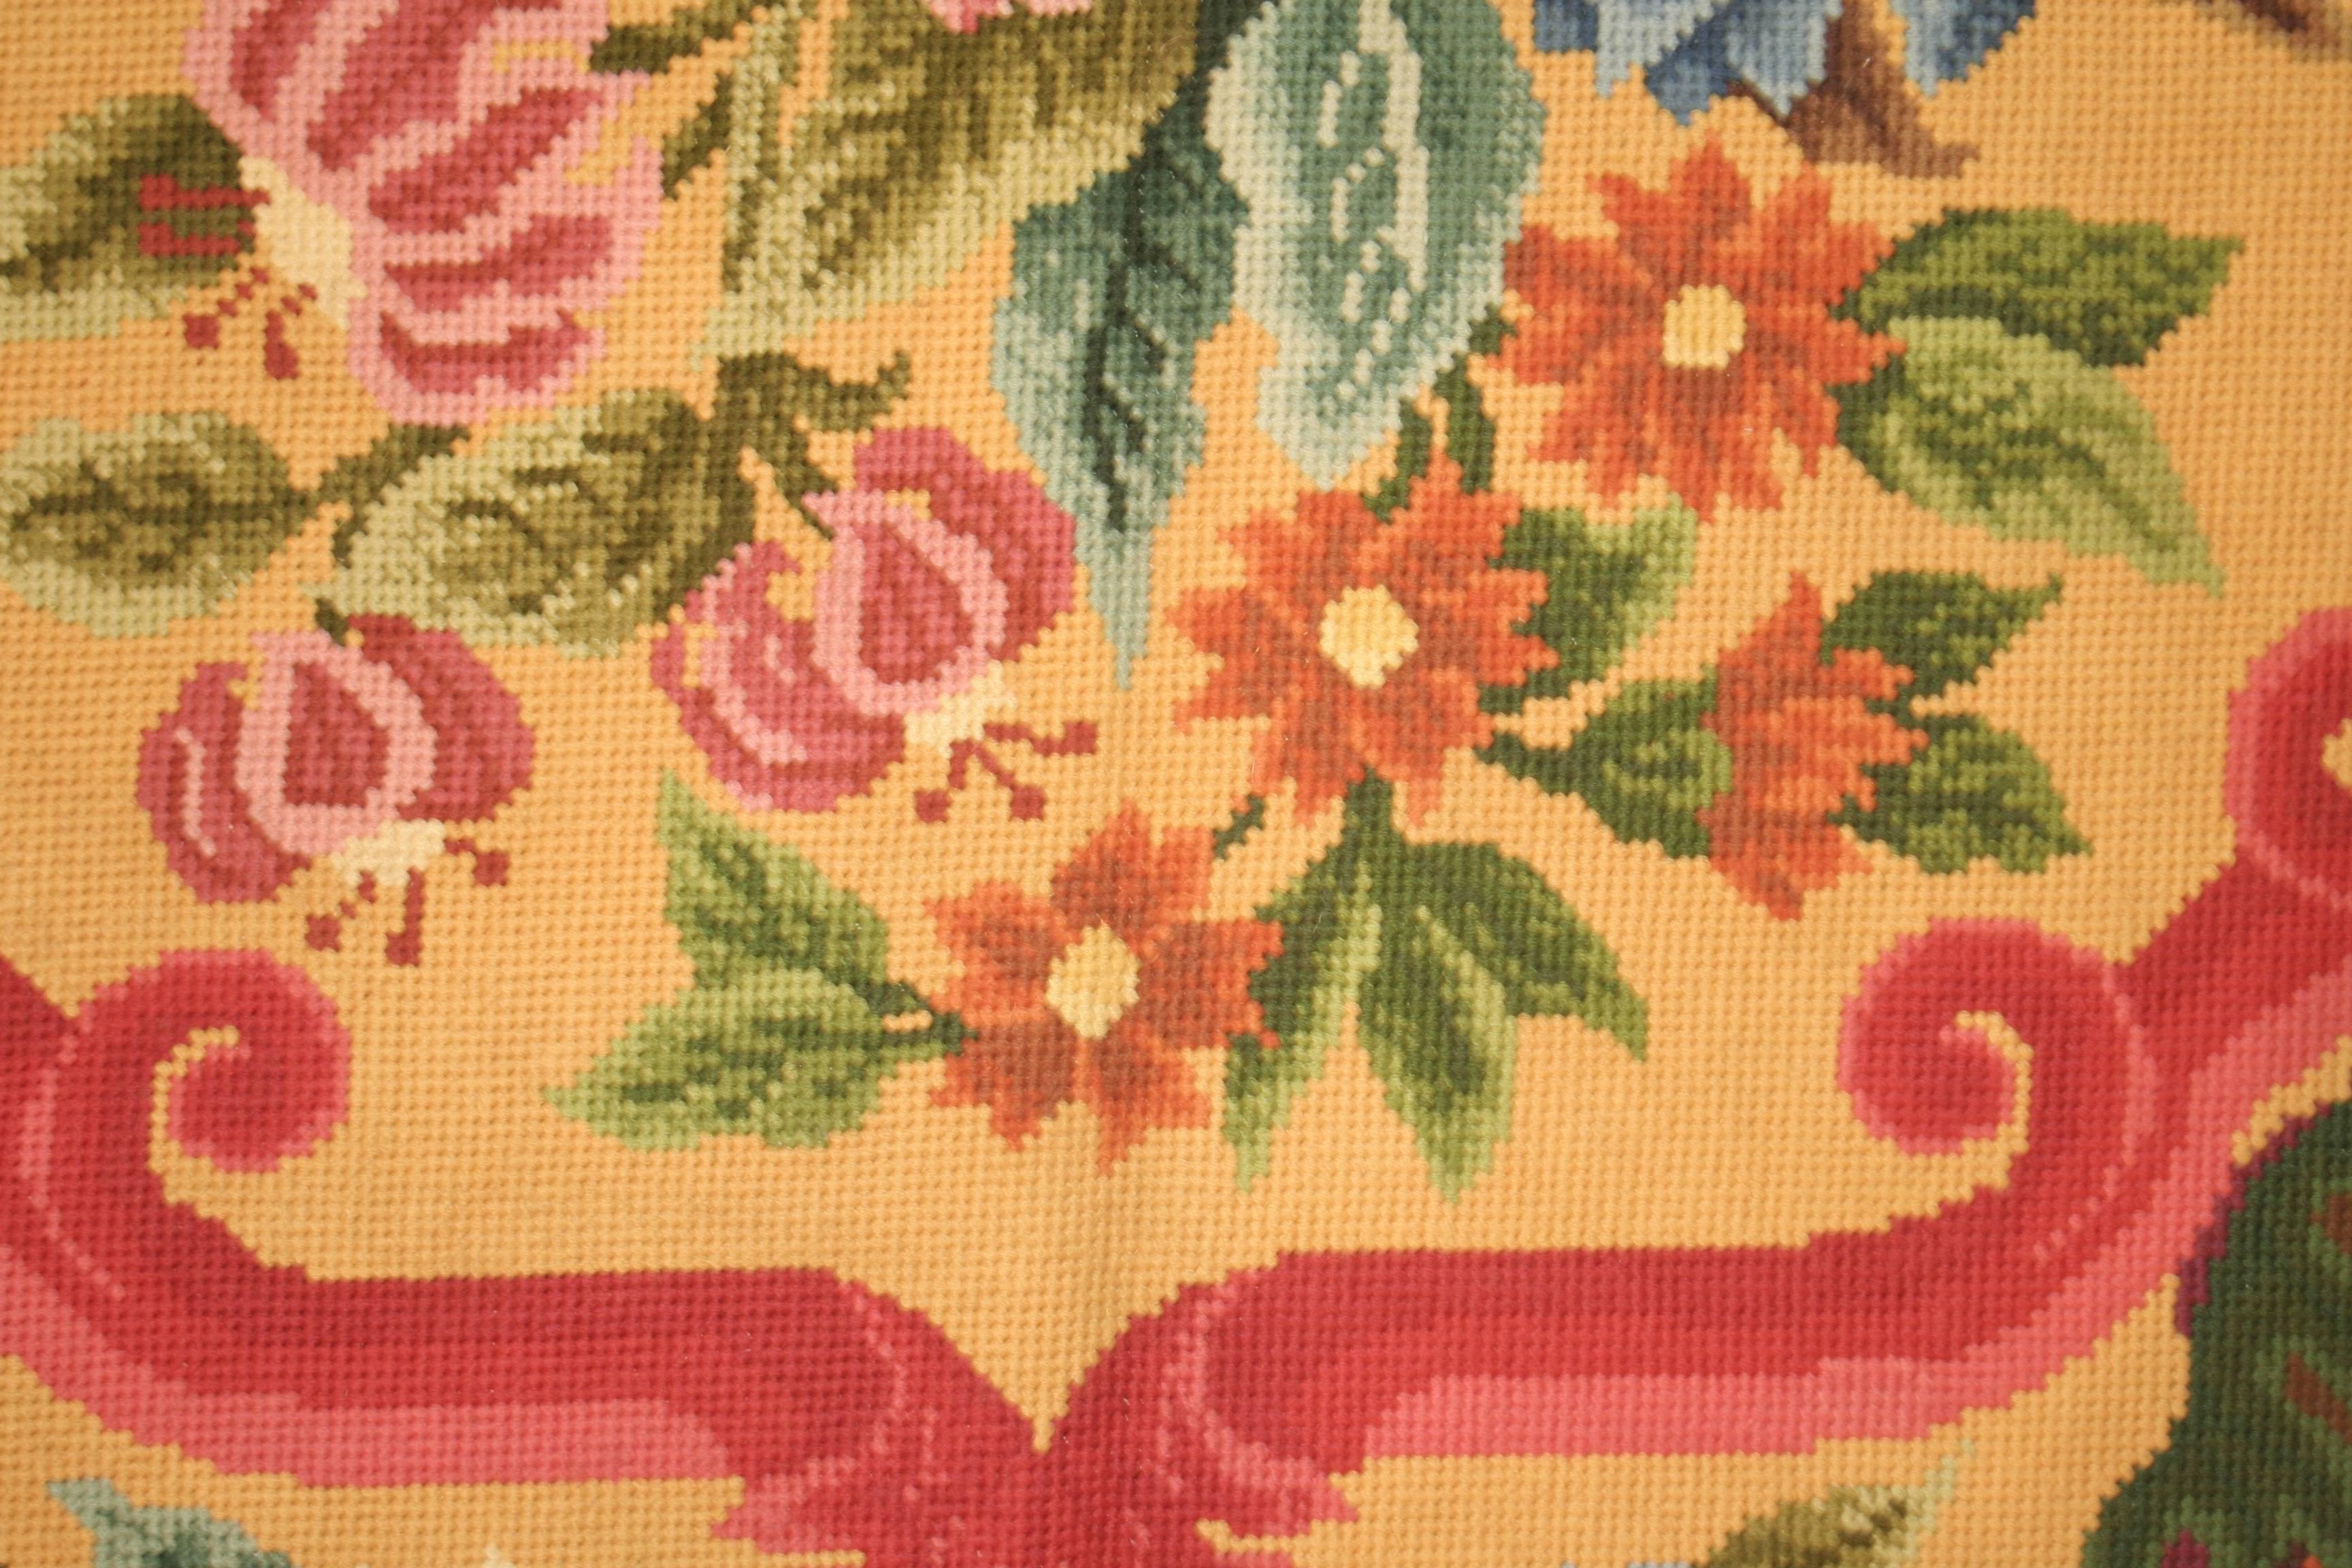 Commissioned in the mid-1980s by the Vigo Carpet Gallery of London to the Royal School of Needlework, this needlepoint signalled a brief revivalist period in England for needlepoints with elaborate floral patterns at the height of the fashion for